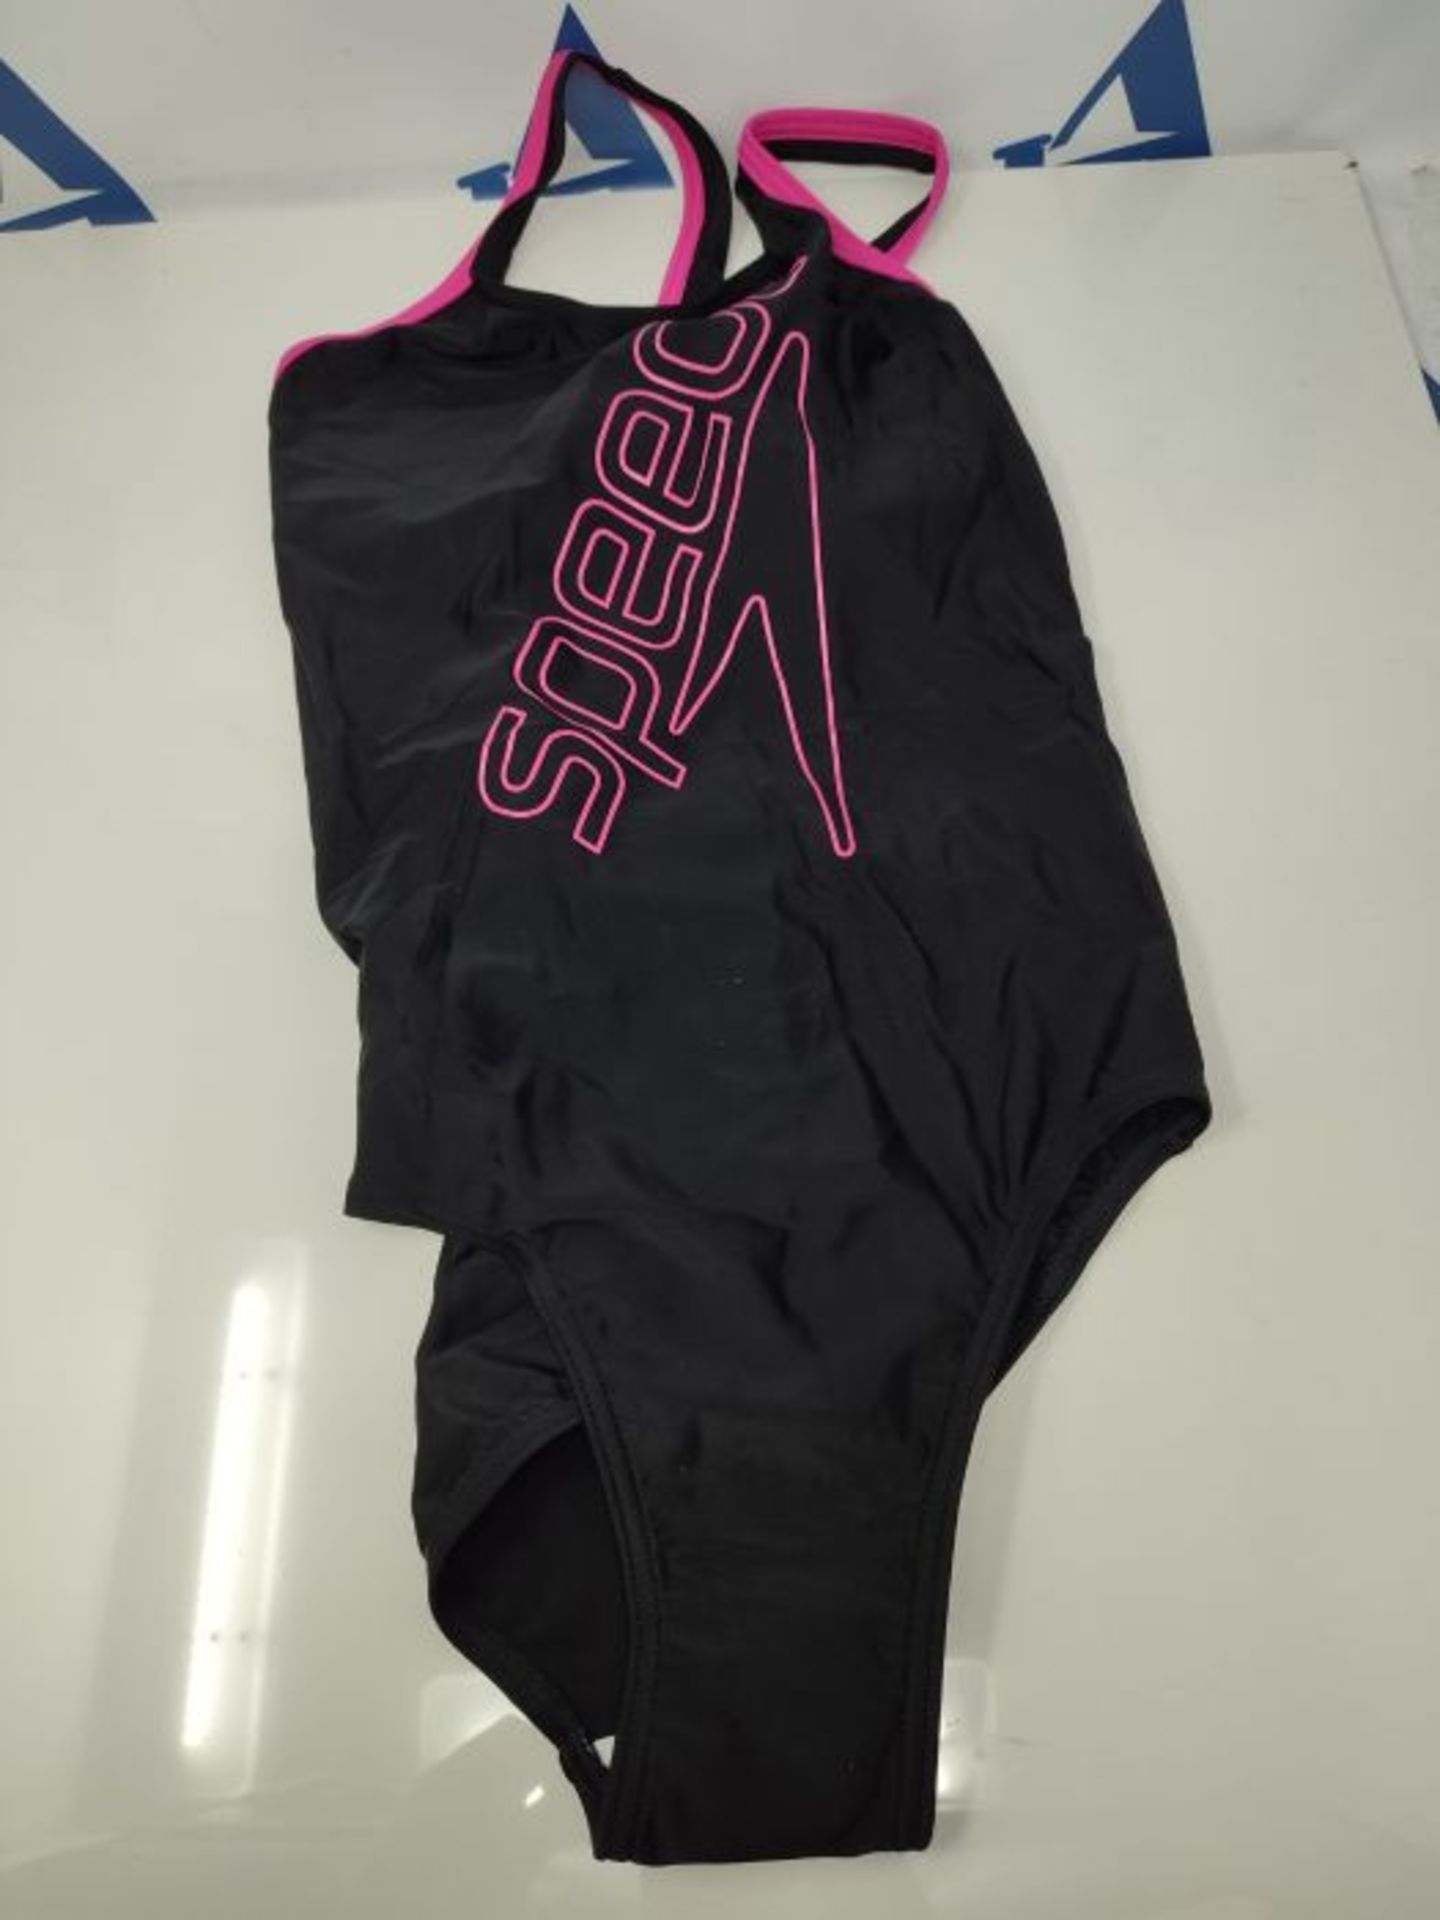 Speedo Girl's Boom Logo Placement Flyback Swimsuit - Image 2 of 3